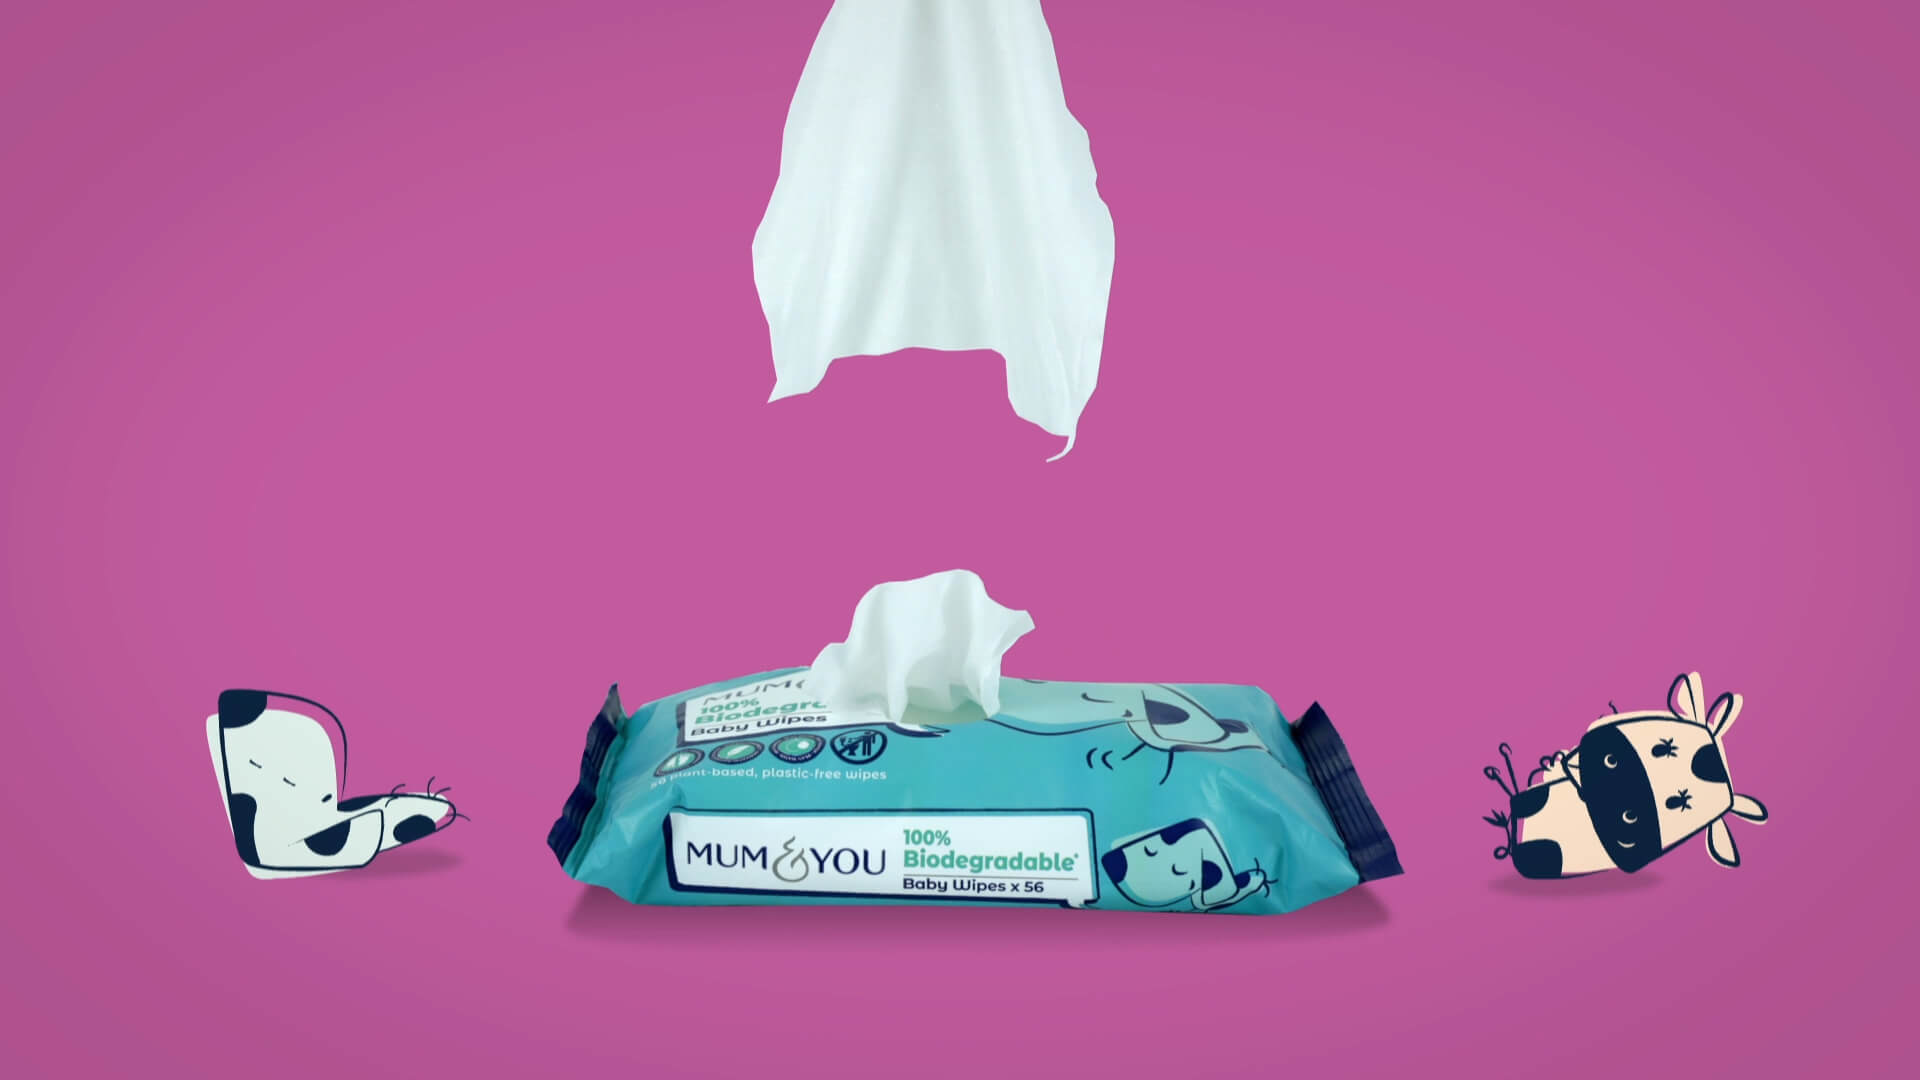 Baby Wipes TV Ad project image 0